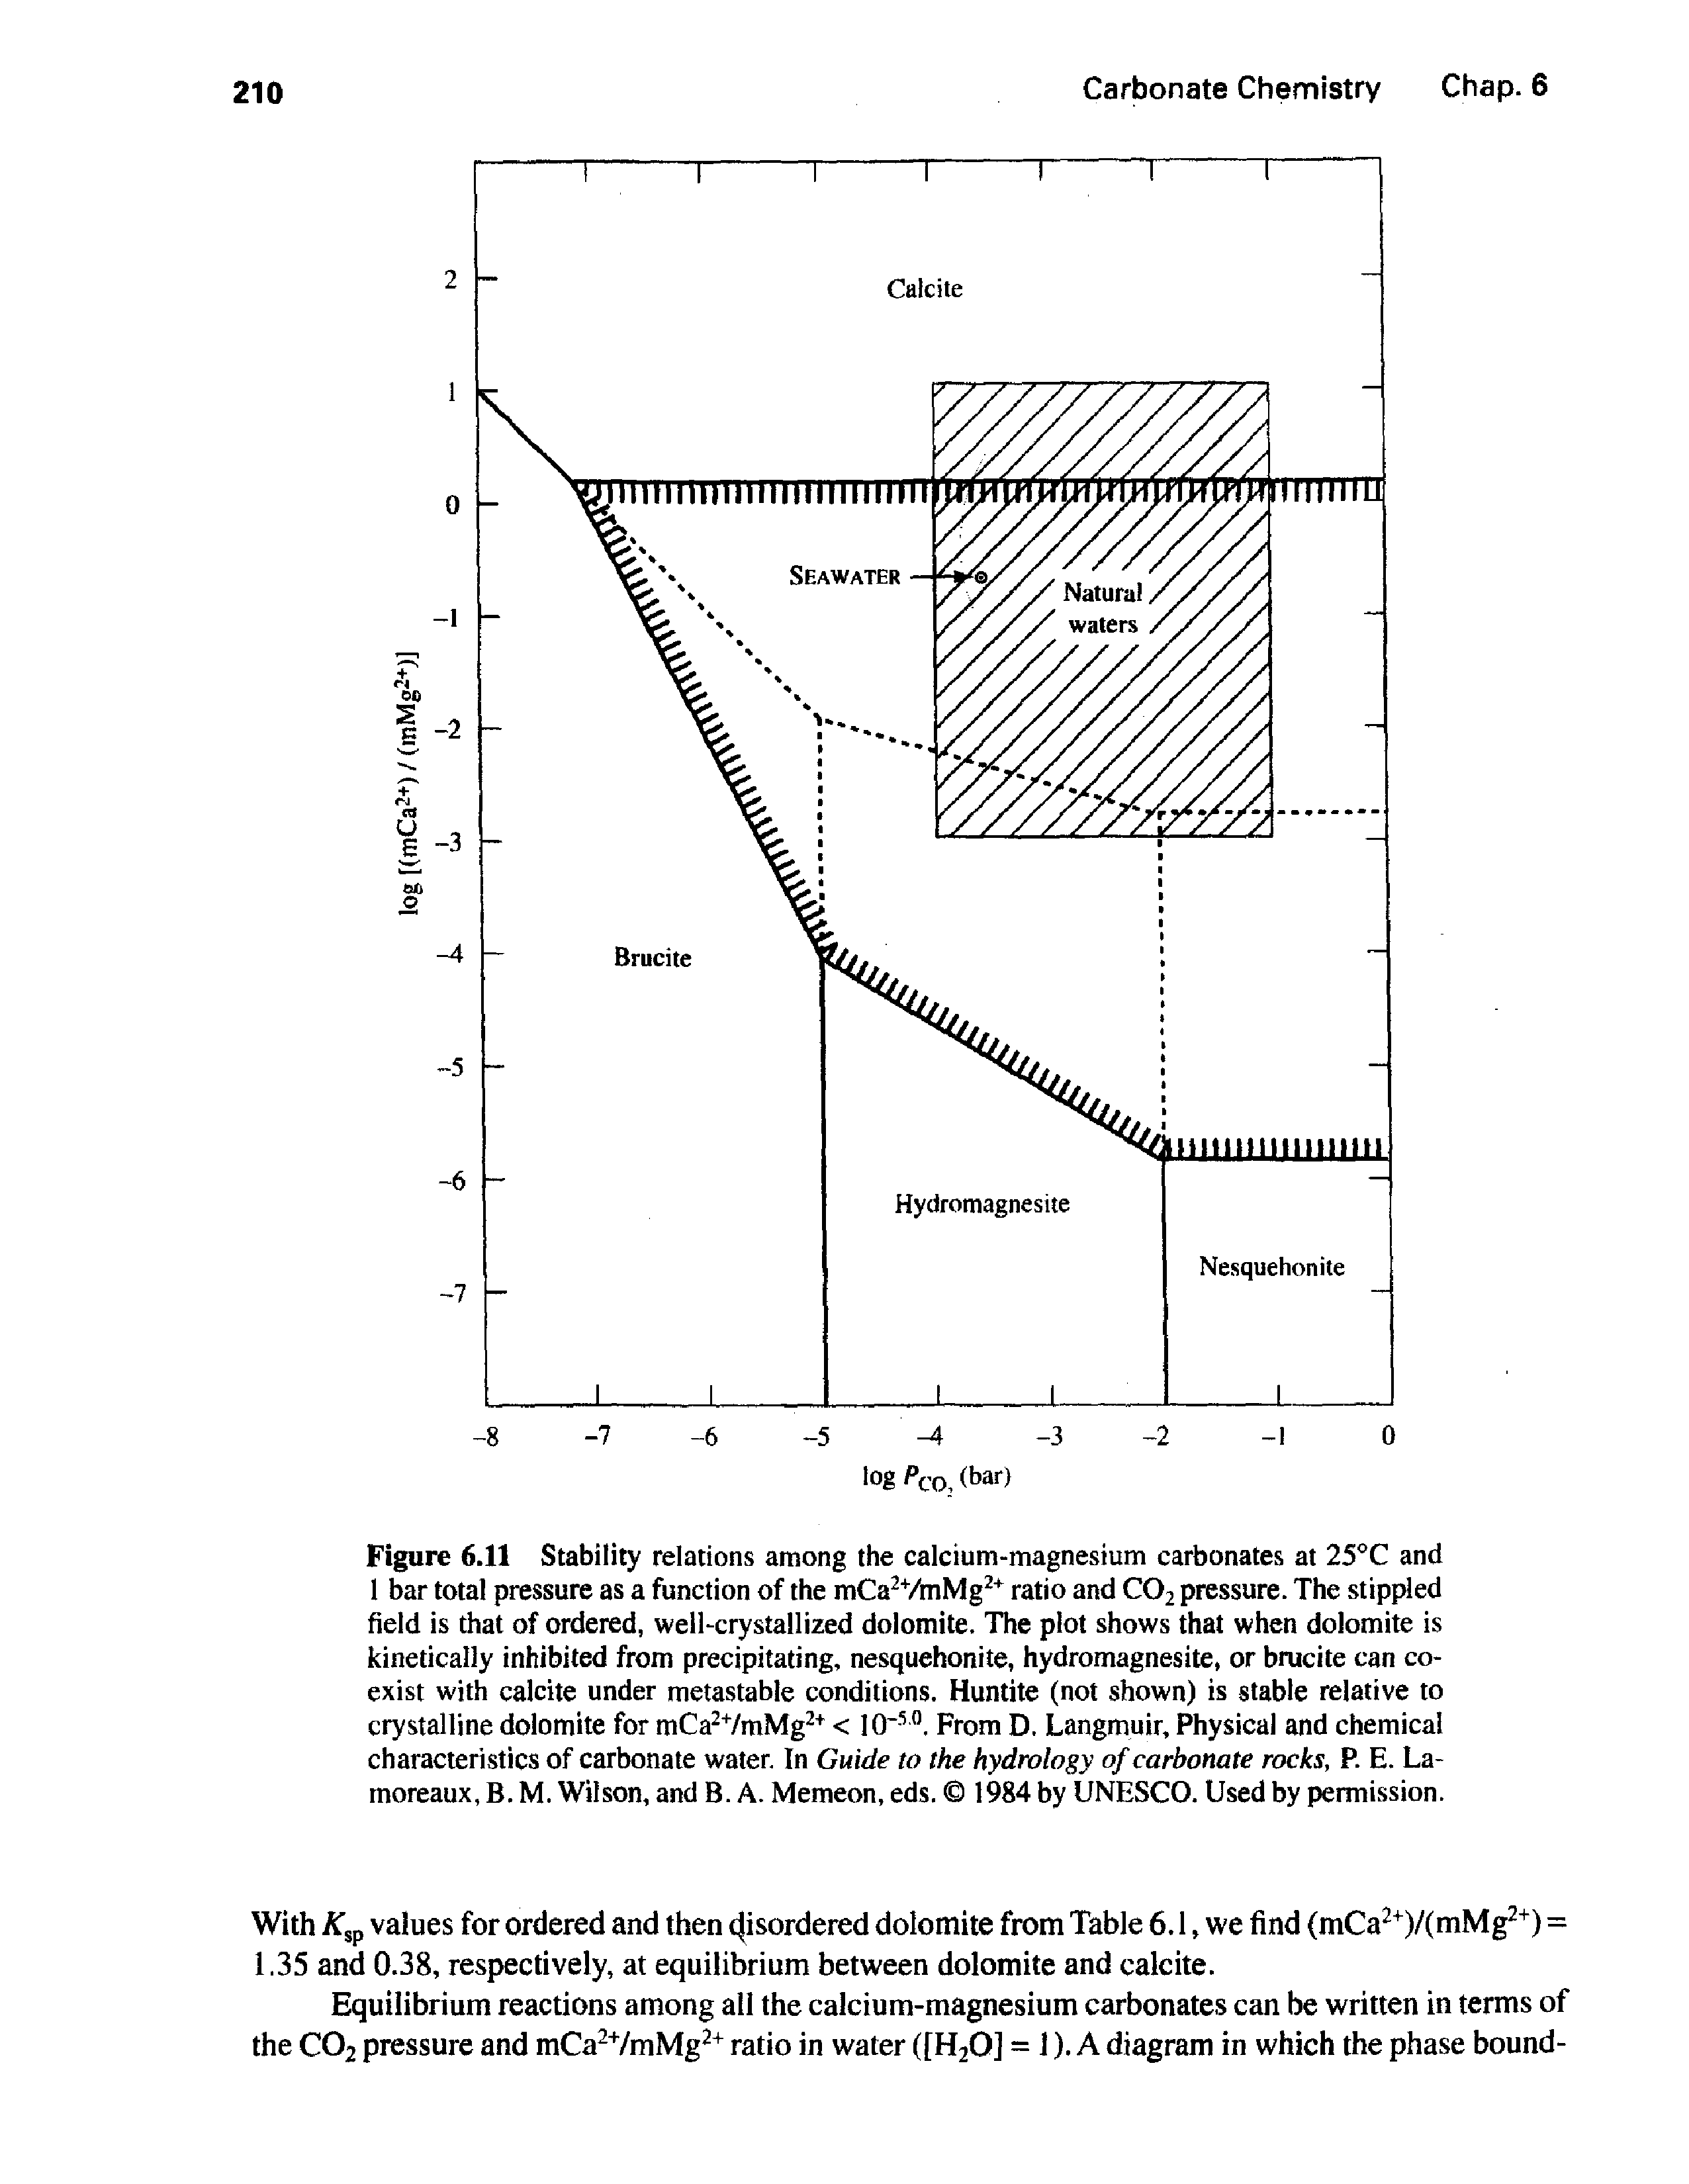 Figure 6.11 Stability relations among the calcium-magnesium carbonates at 25 C and 1 bar total pressure as a function of the mCa VmMg ratio and CO2 pressure. The stippled field is that of ordered, well-crystallized dolomite. The plot shows that when dolomite is kinetically inhibited from precipitating, nesquehonite, hydromagnesite, or brucite can coexist with calcite under metastable conditions. Huntite (not shown) is stable relative to crystalline dolomite for mCa VmMg < 10 . From D. Langmuir, Physical and chemical characteristics of carbonate water. In Guide to the hydrology of carbonate rocks, P. E. La-moreaux, B. M. Wilson, and B. A. Memeon, eds. 1984 by UNESCO. Used by permission.